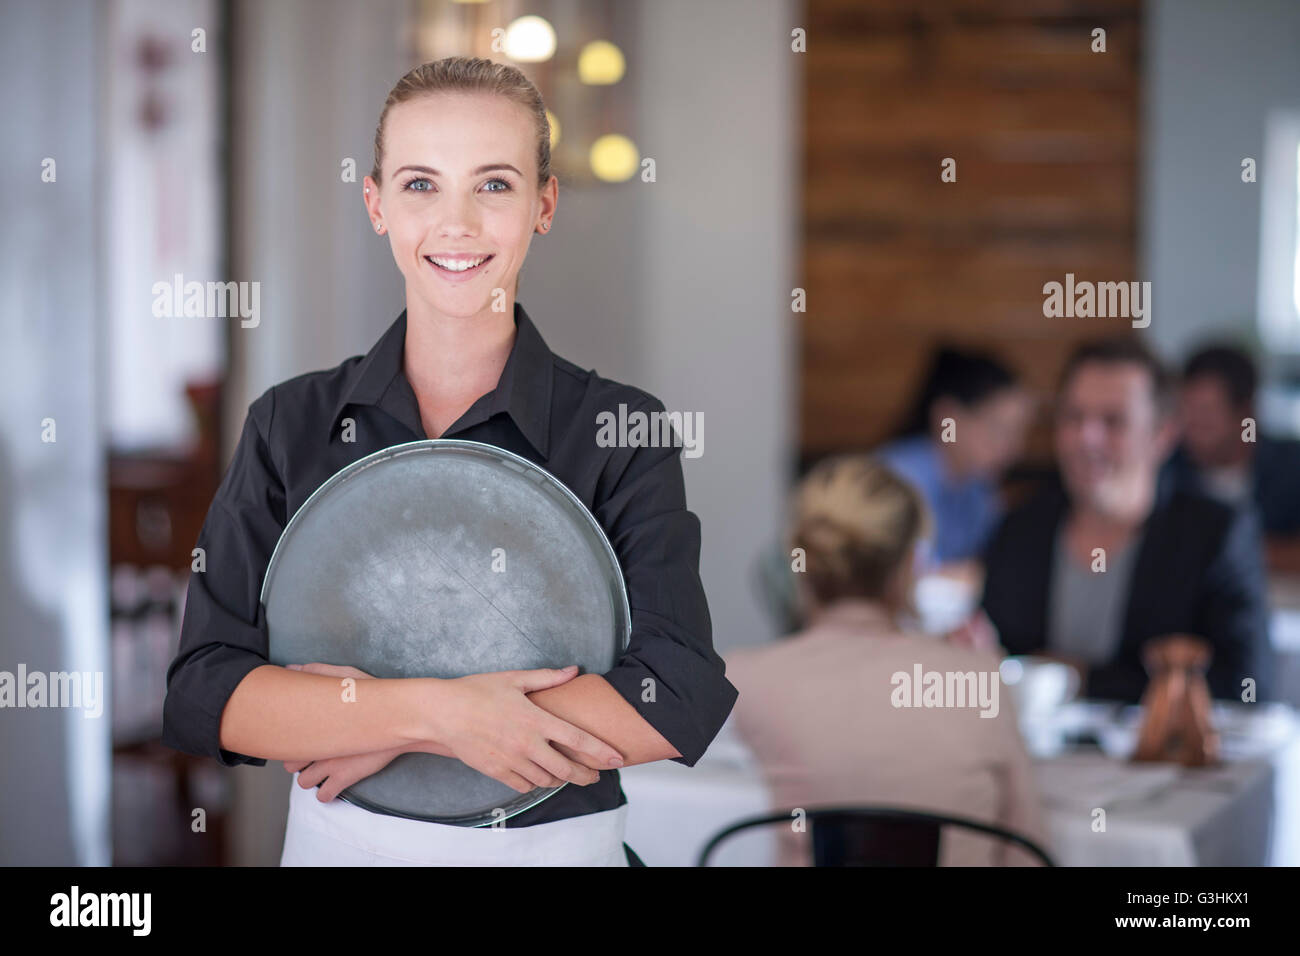 Waitress with serving tray in busy restaurant Stock Photo